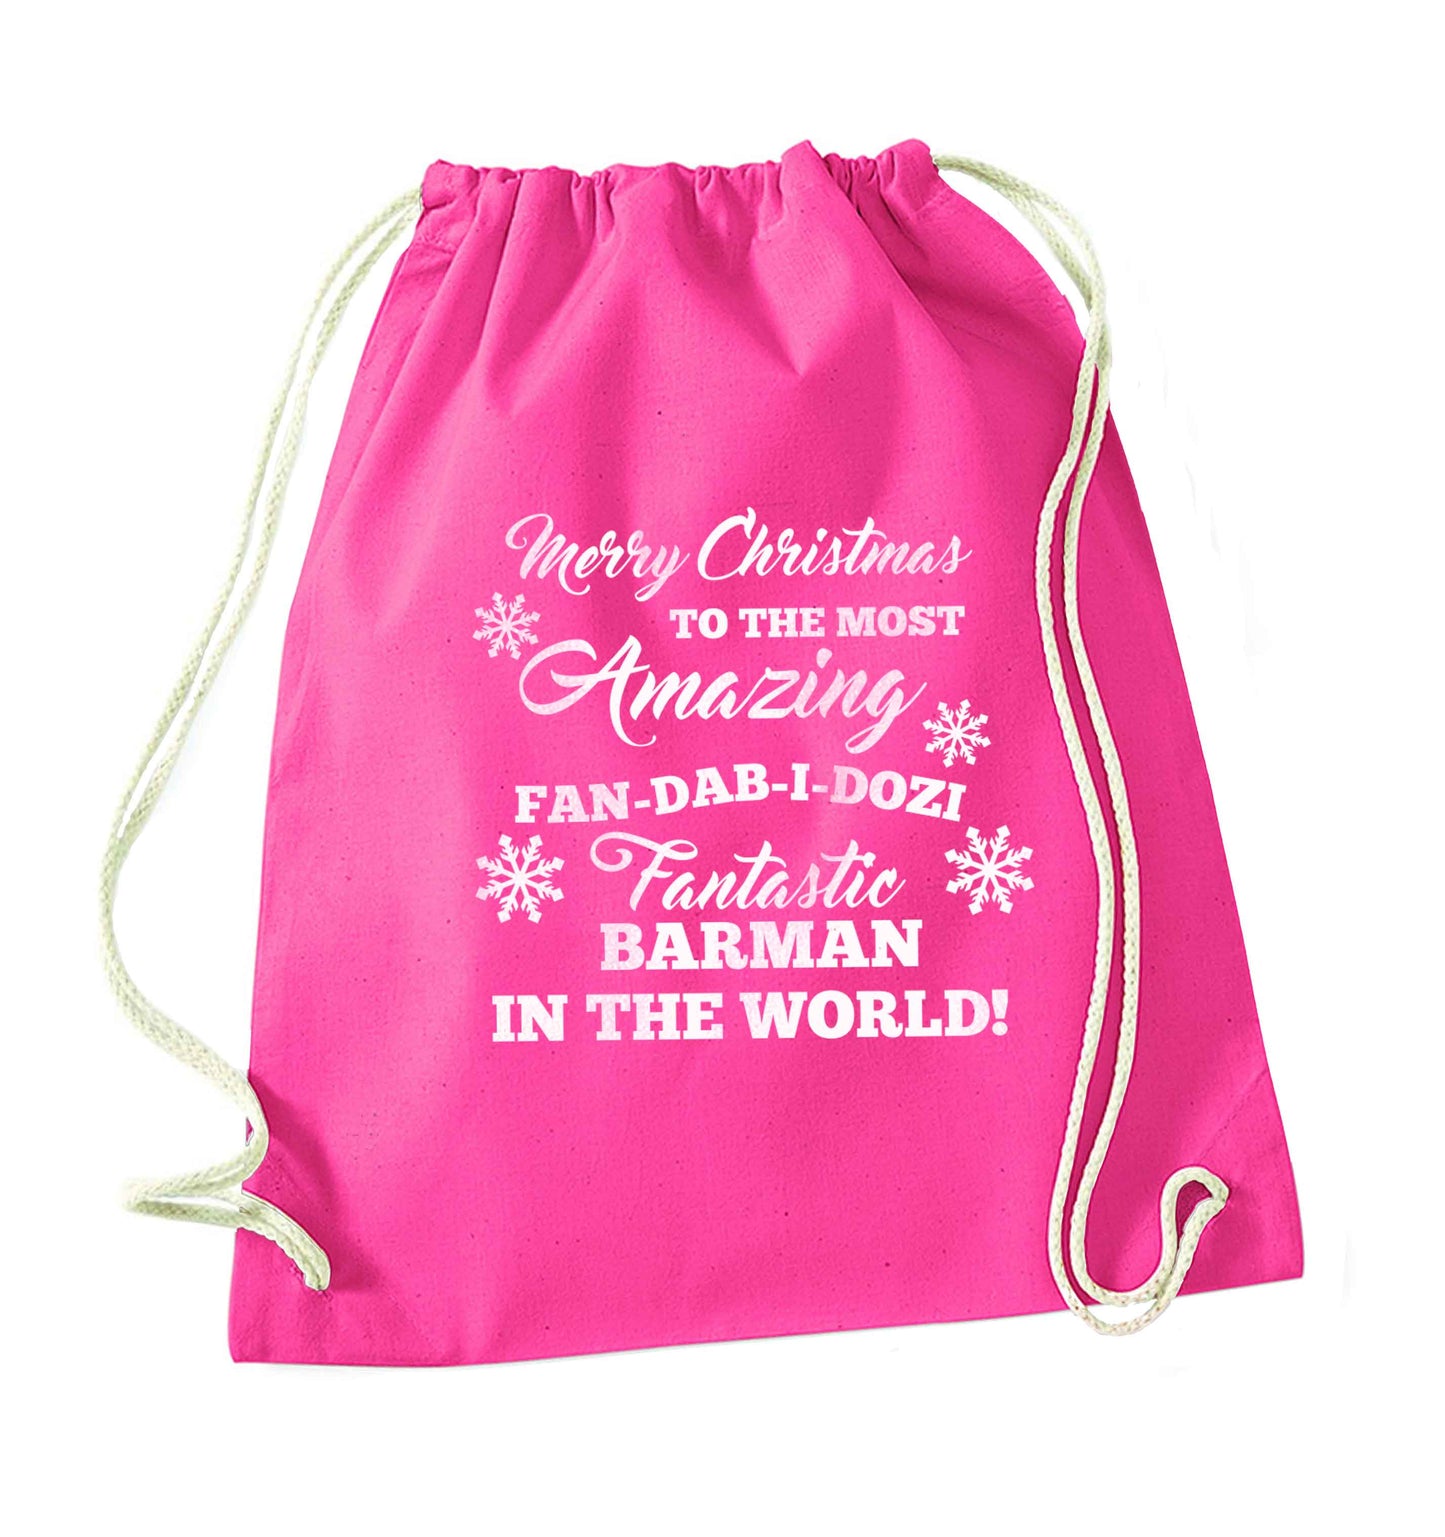 Merry Christmas to the most amazing barman in the world! pink drawstring bag